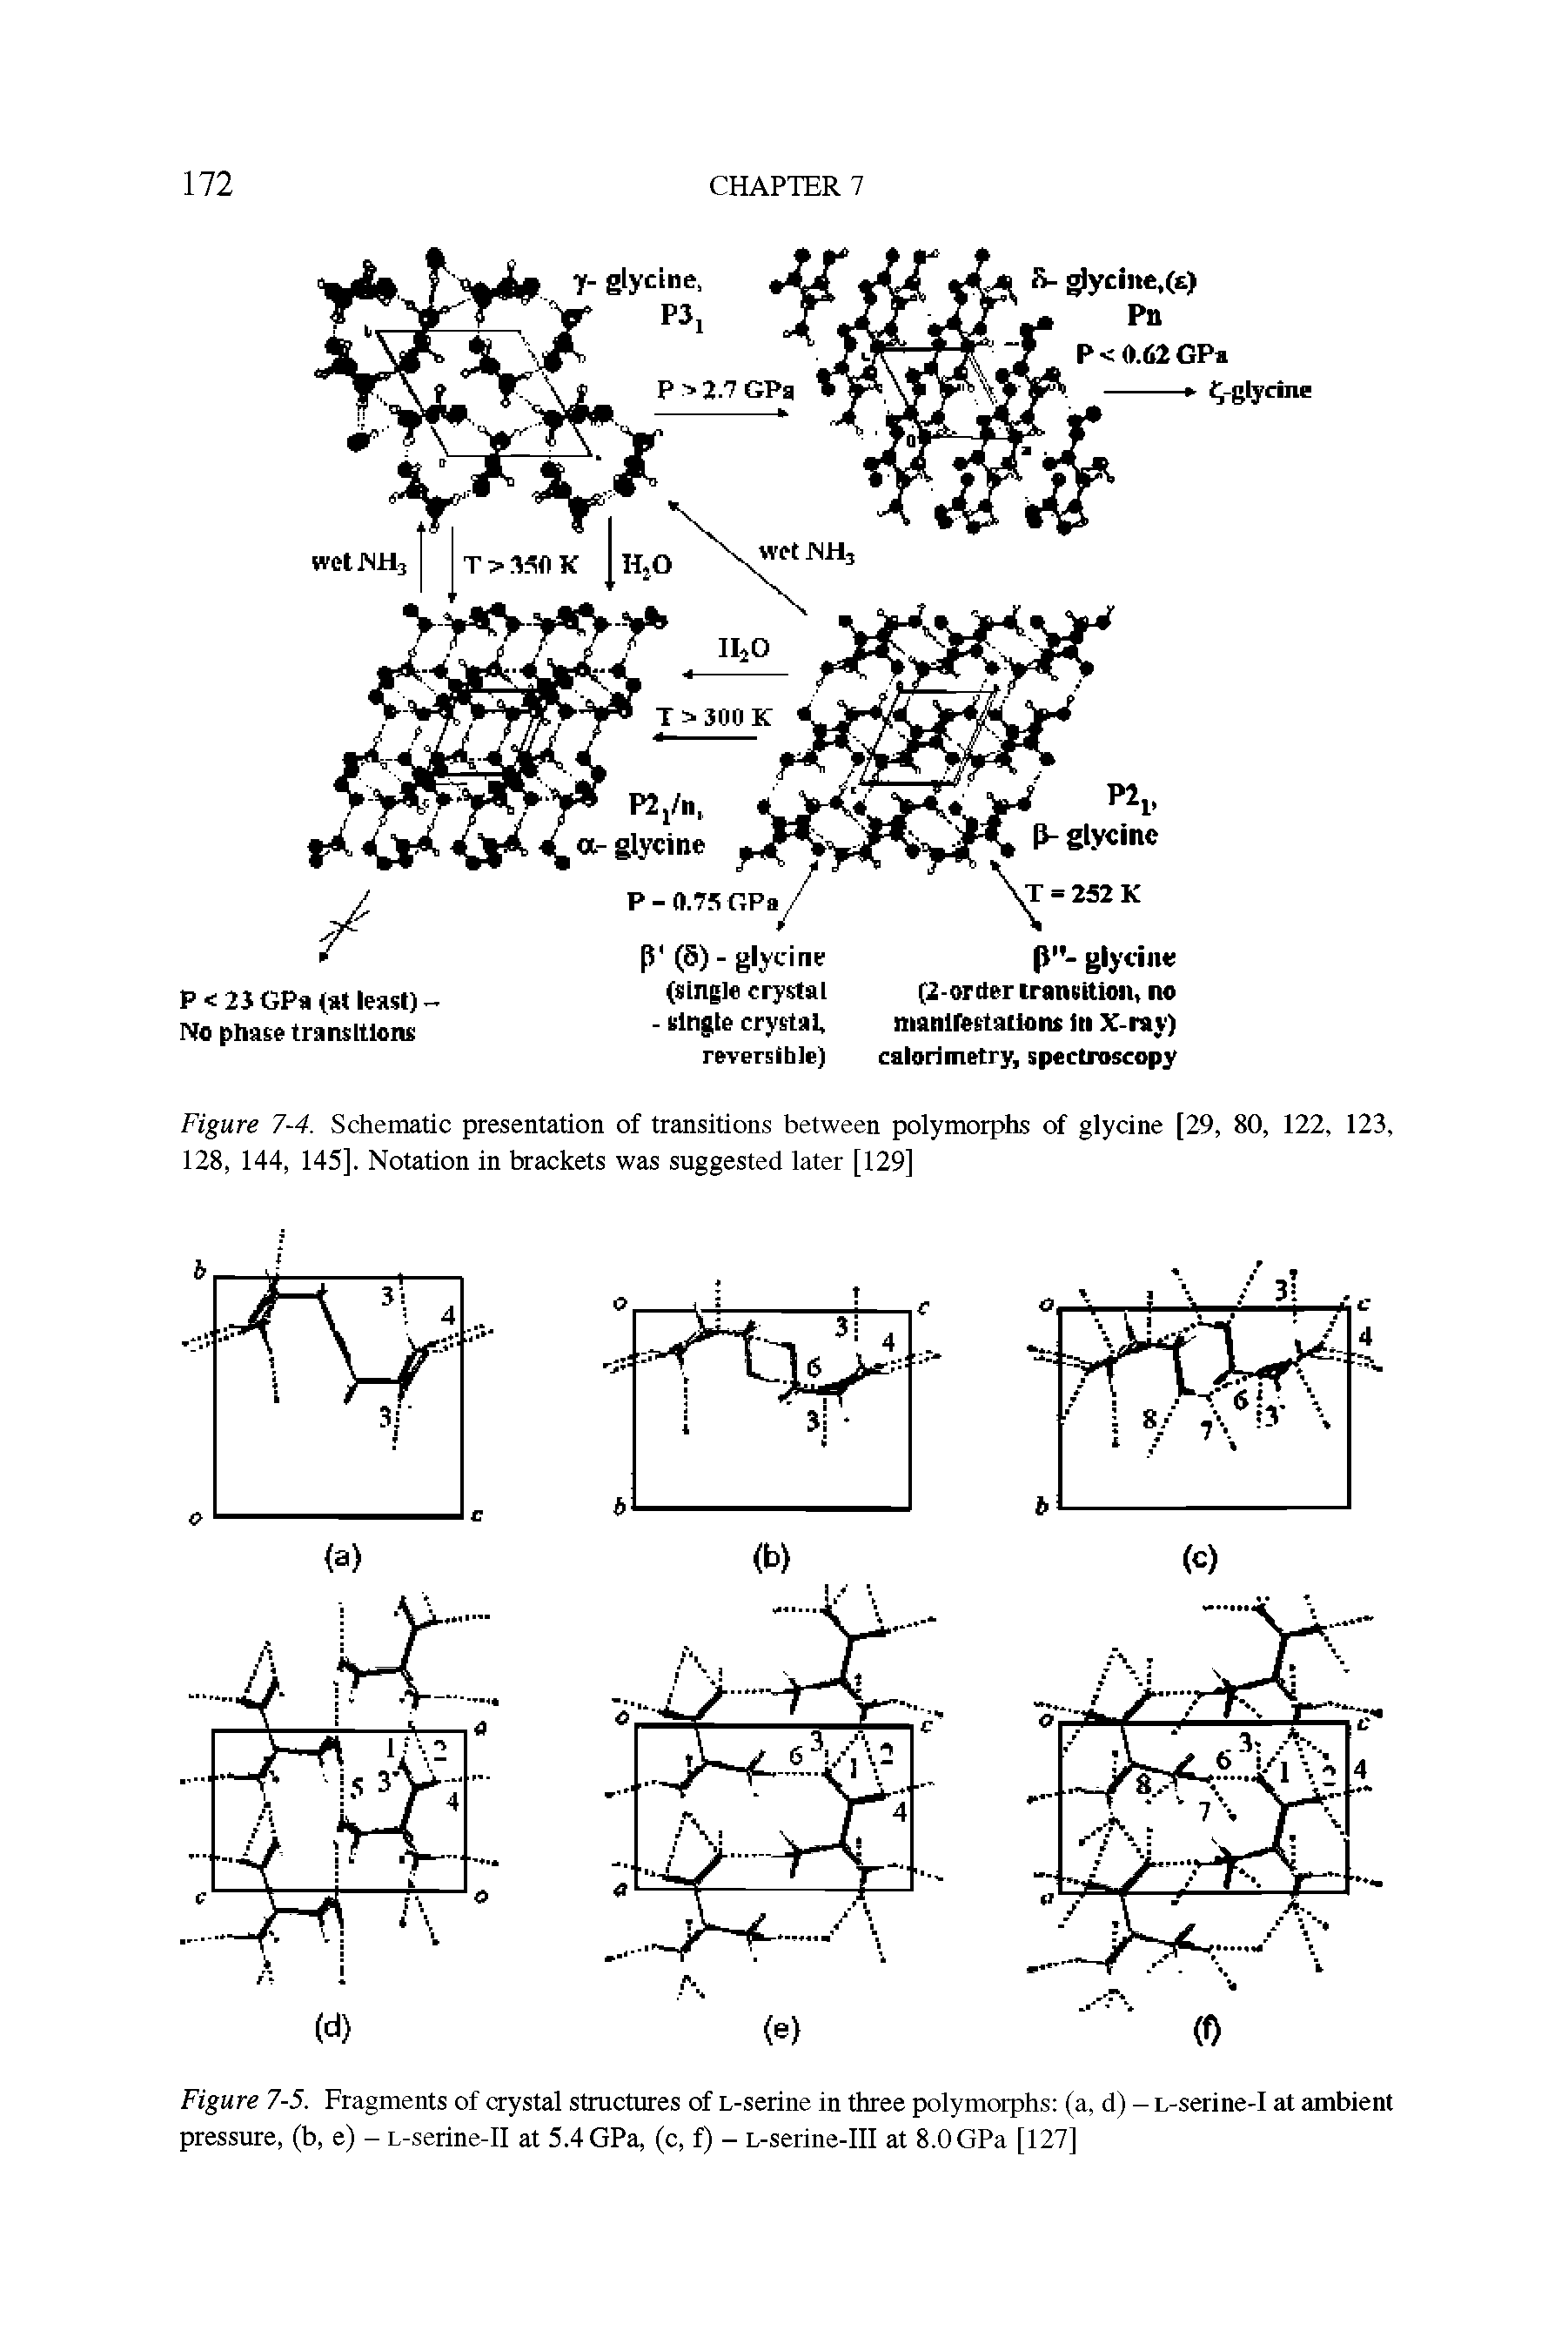 Figure 7-5. Fragments of crystal structures of L-serine in three polymorphs (a, d) - L-serine-I at ambient pressure, (b, e) - L-serine-II at 5.4 GPa, (c, f) - L-serine-III at 8.0 GPa [127]...